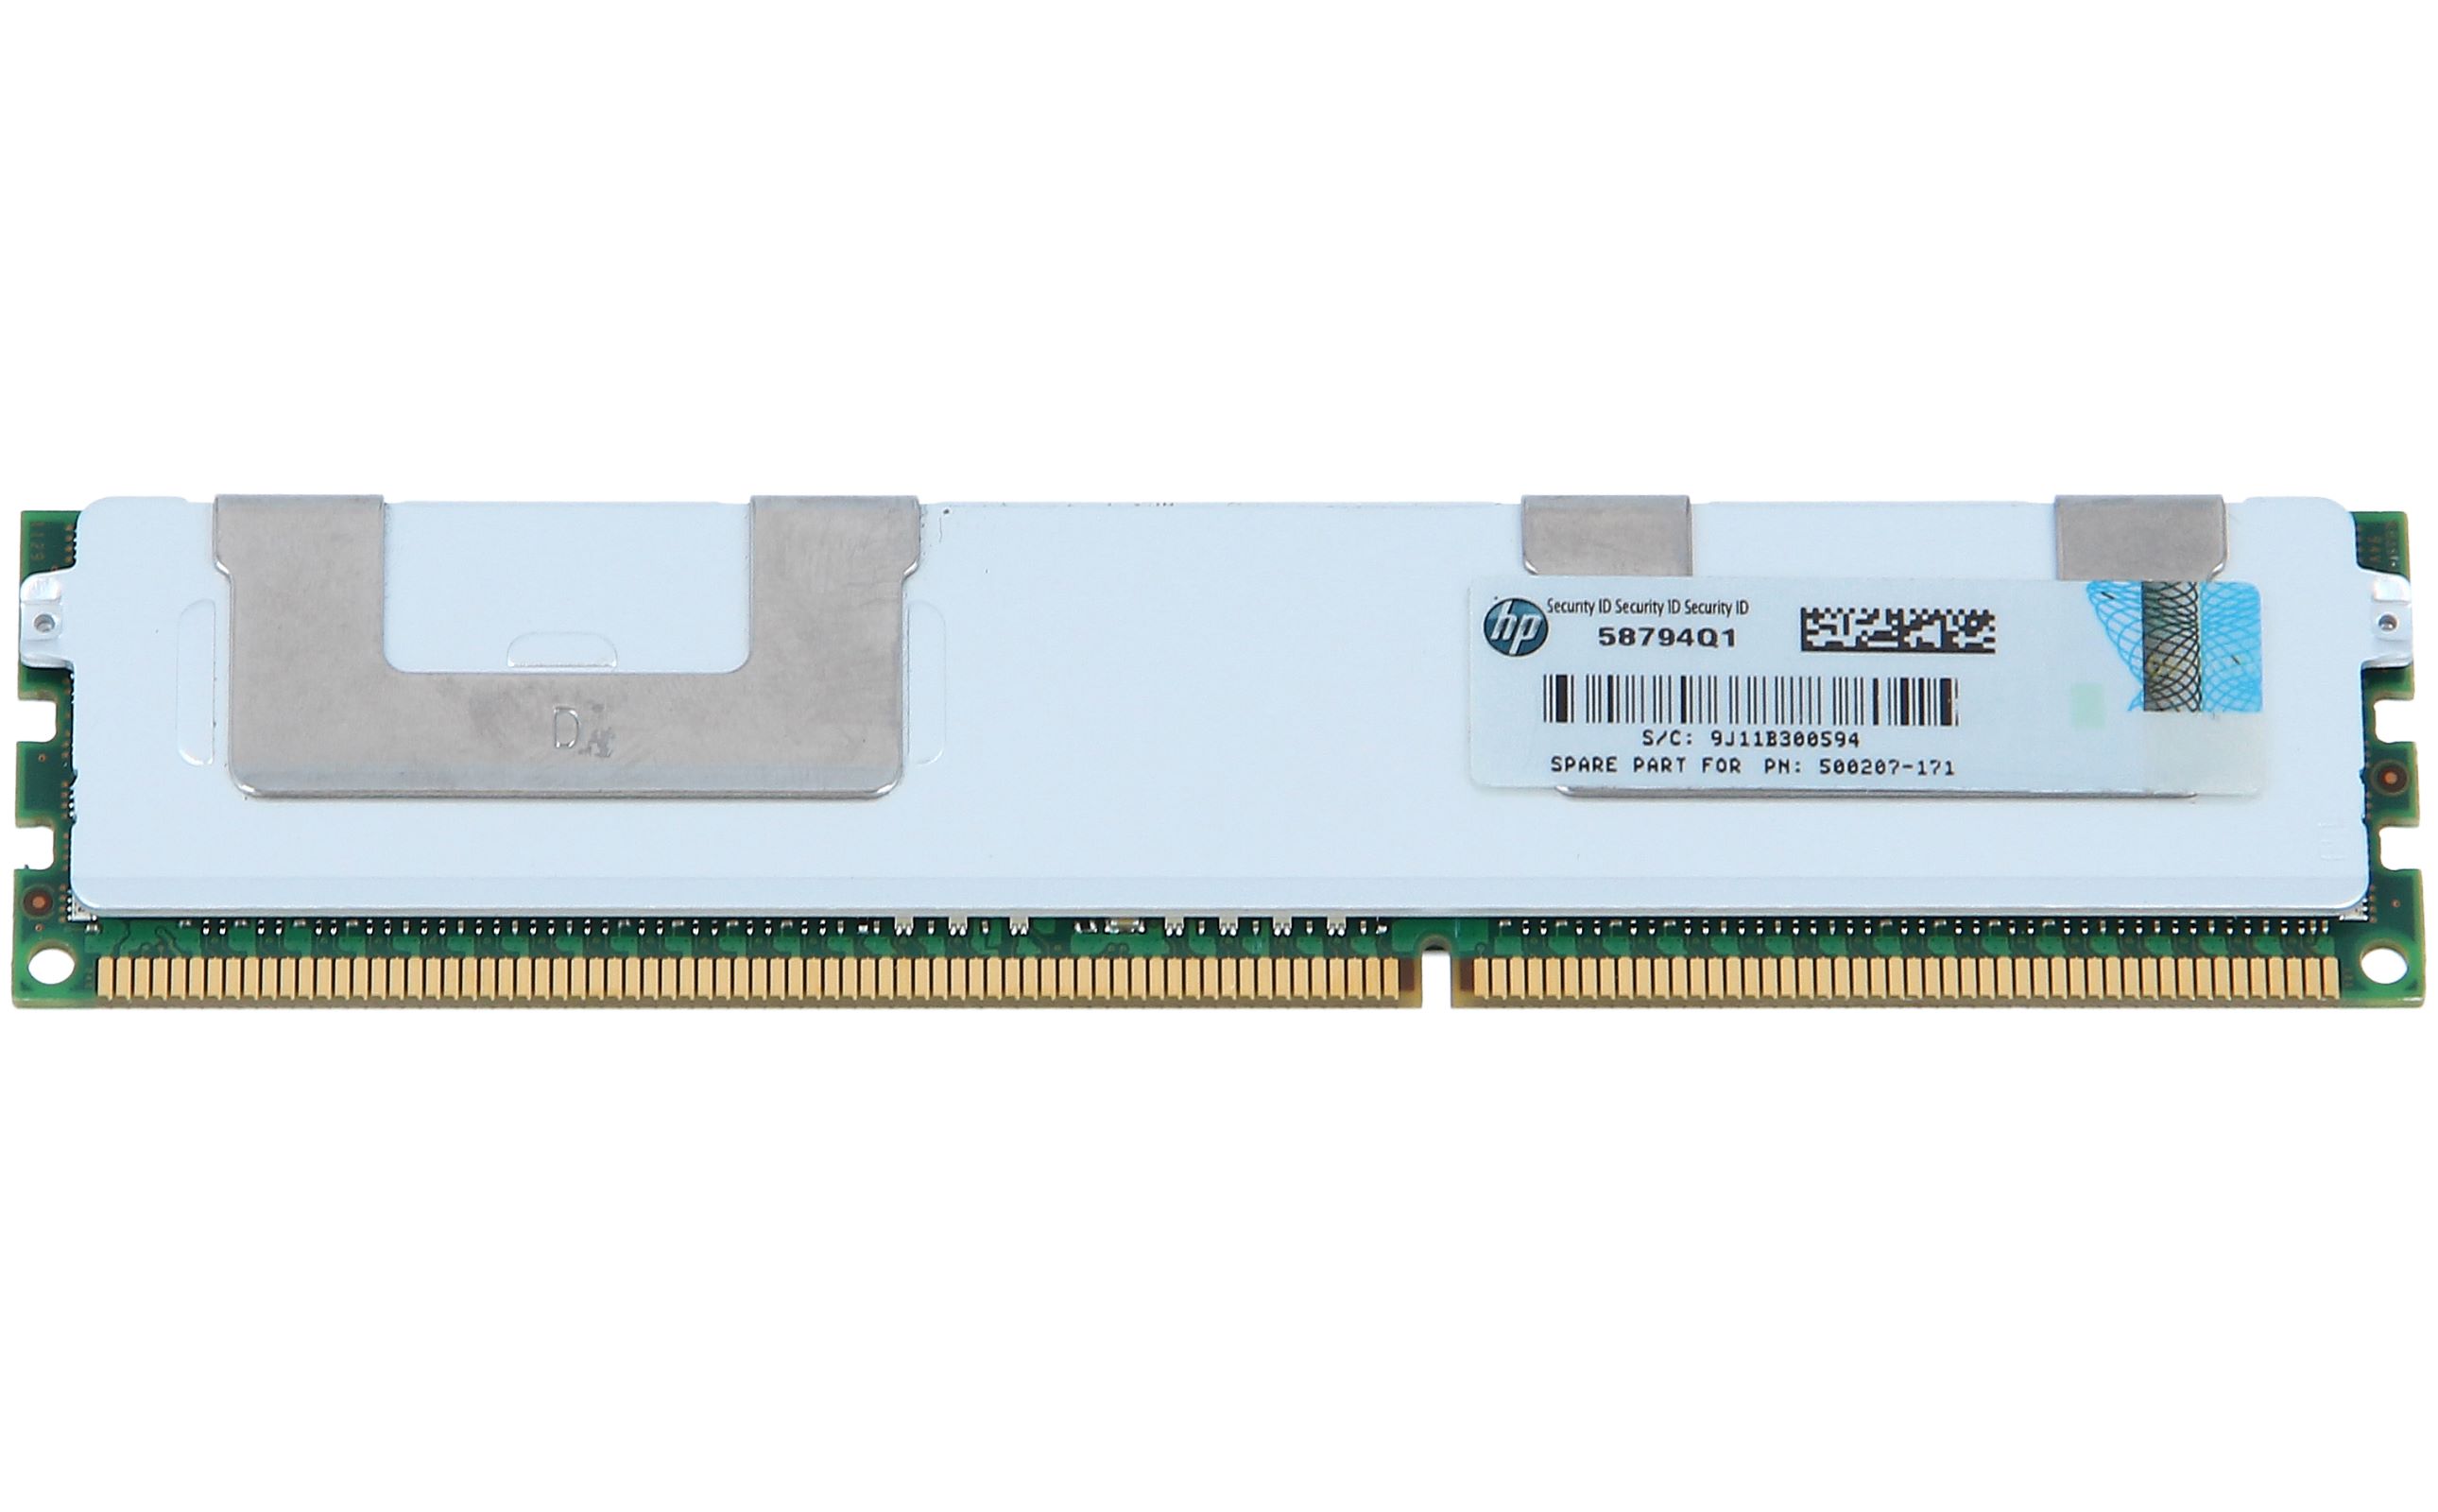 HP 500207-171 HP 16GB (1x16GB) Quad Rank x4 PC3-8500 (DDR3-1066) new  and refurbished buy online low prices